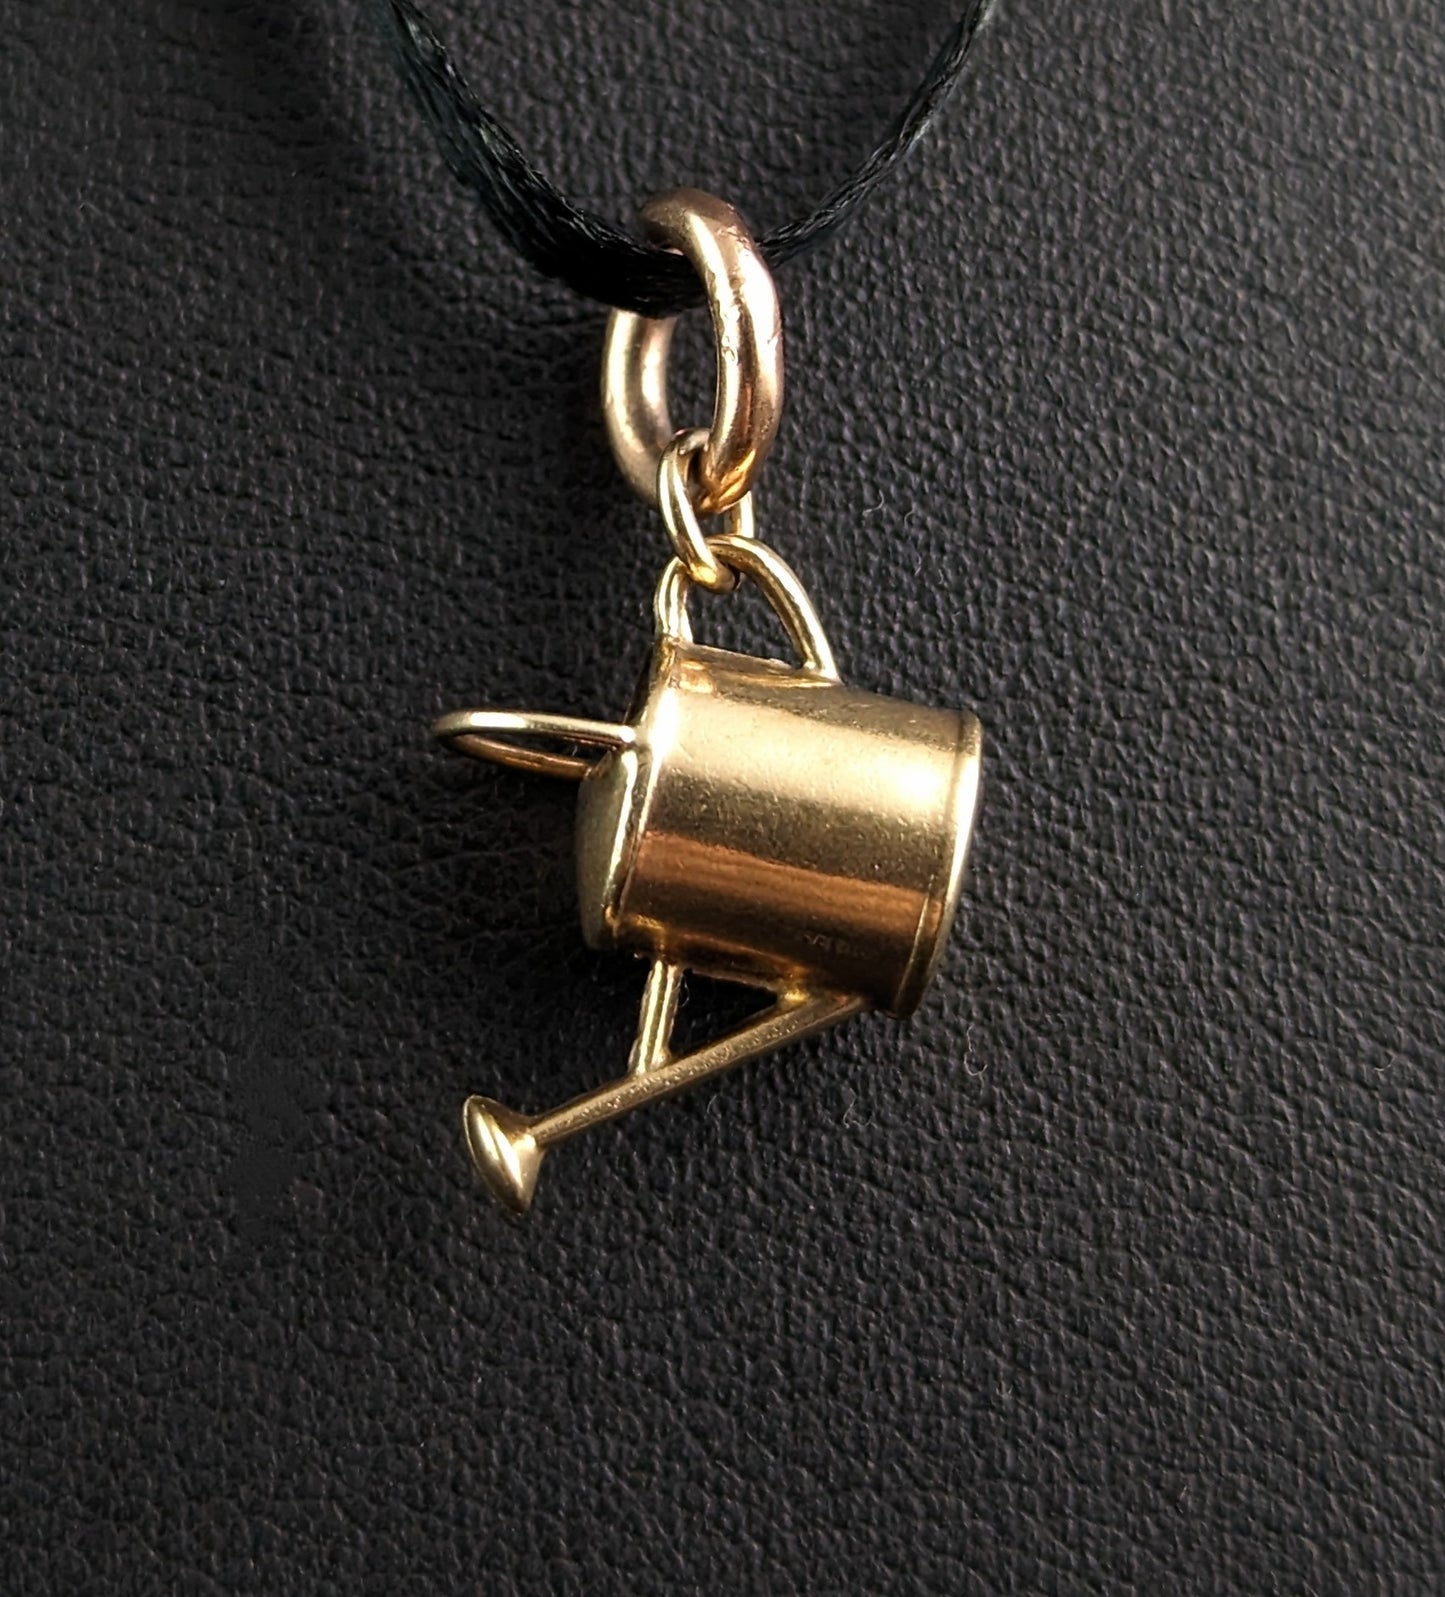 Vintage 9ct gold watering can charm, pendant